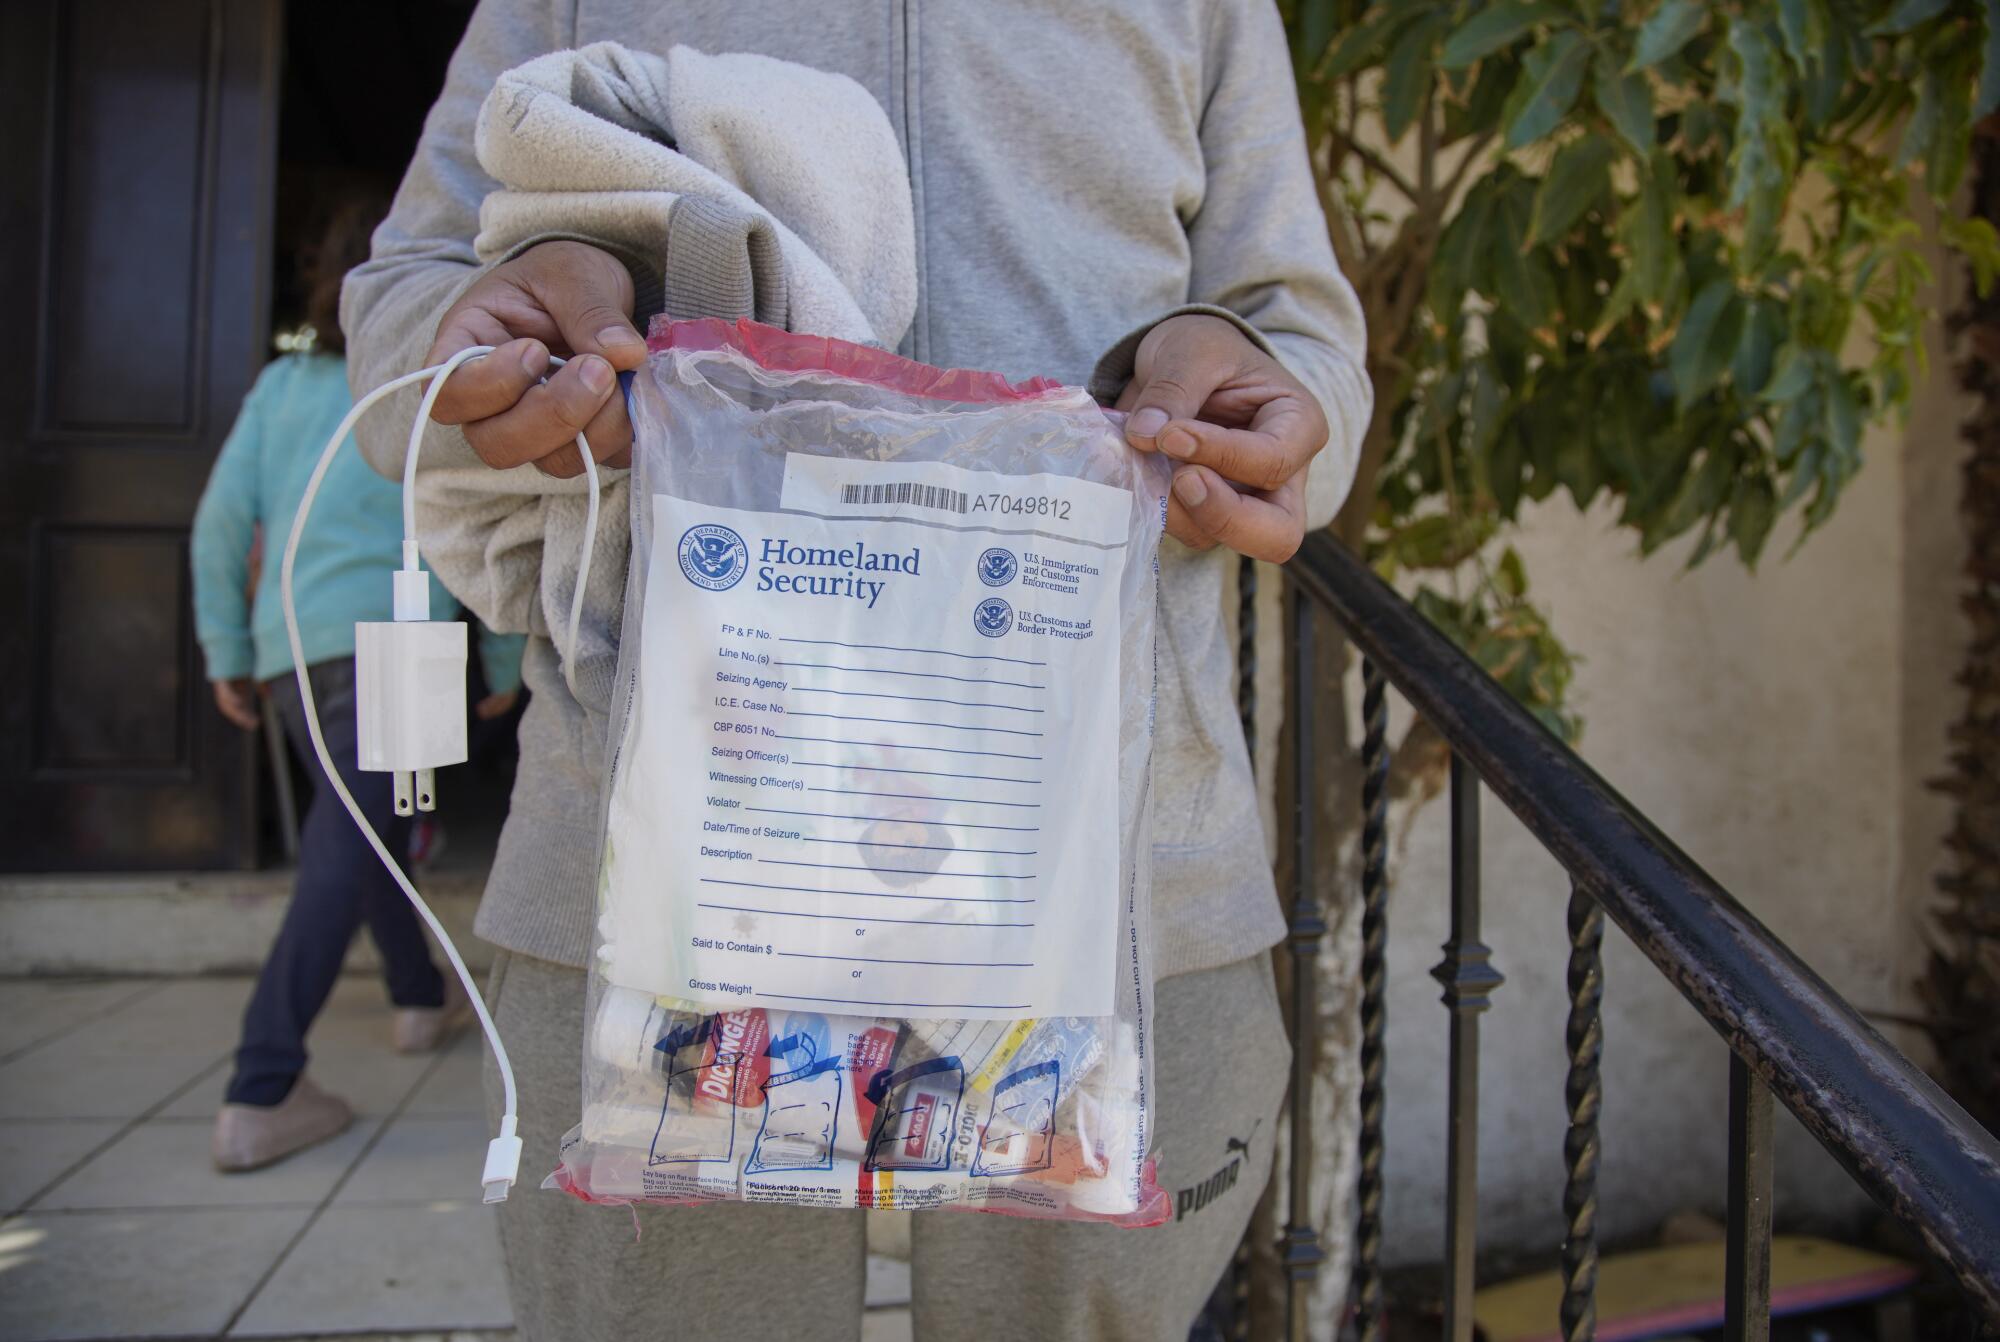 Asylum seekers arriving at the shelter come with a plastic bag for their belongings.